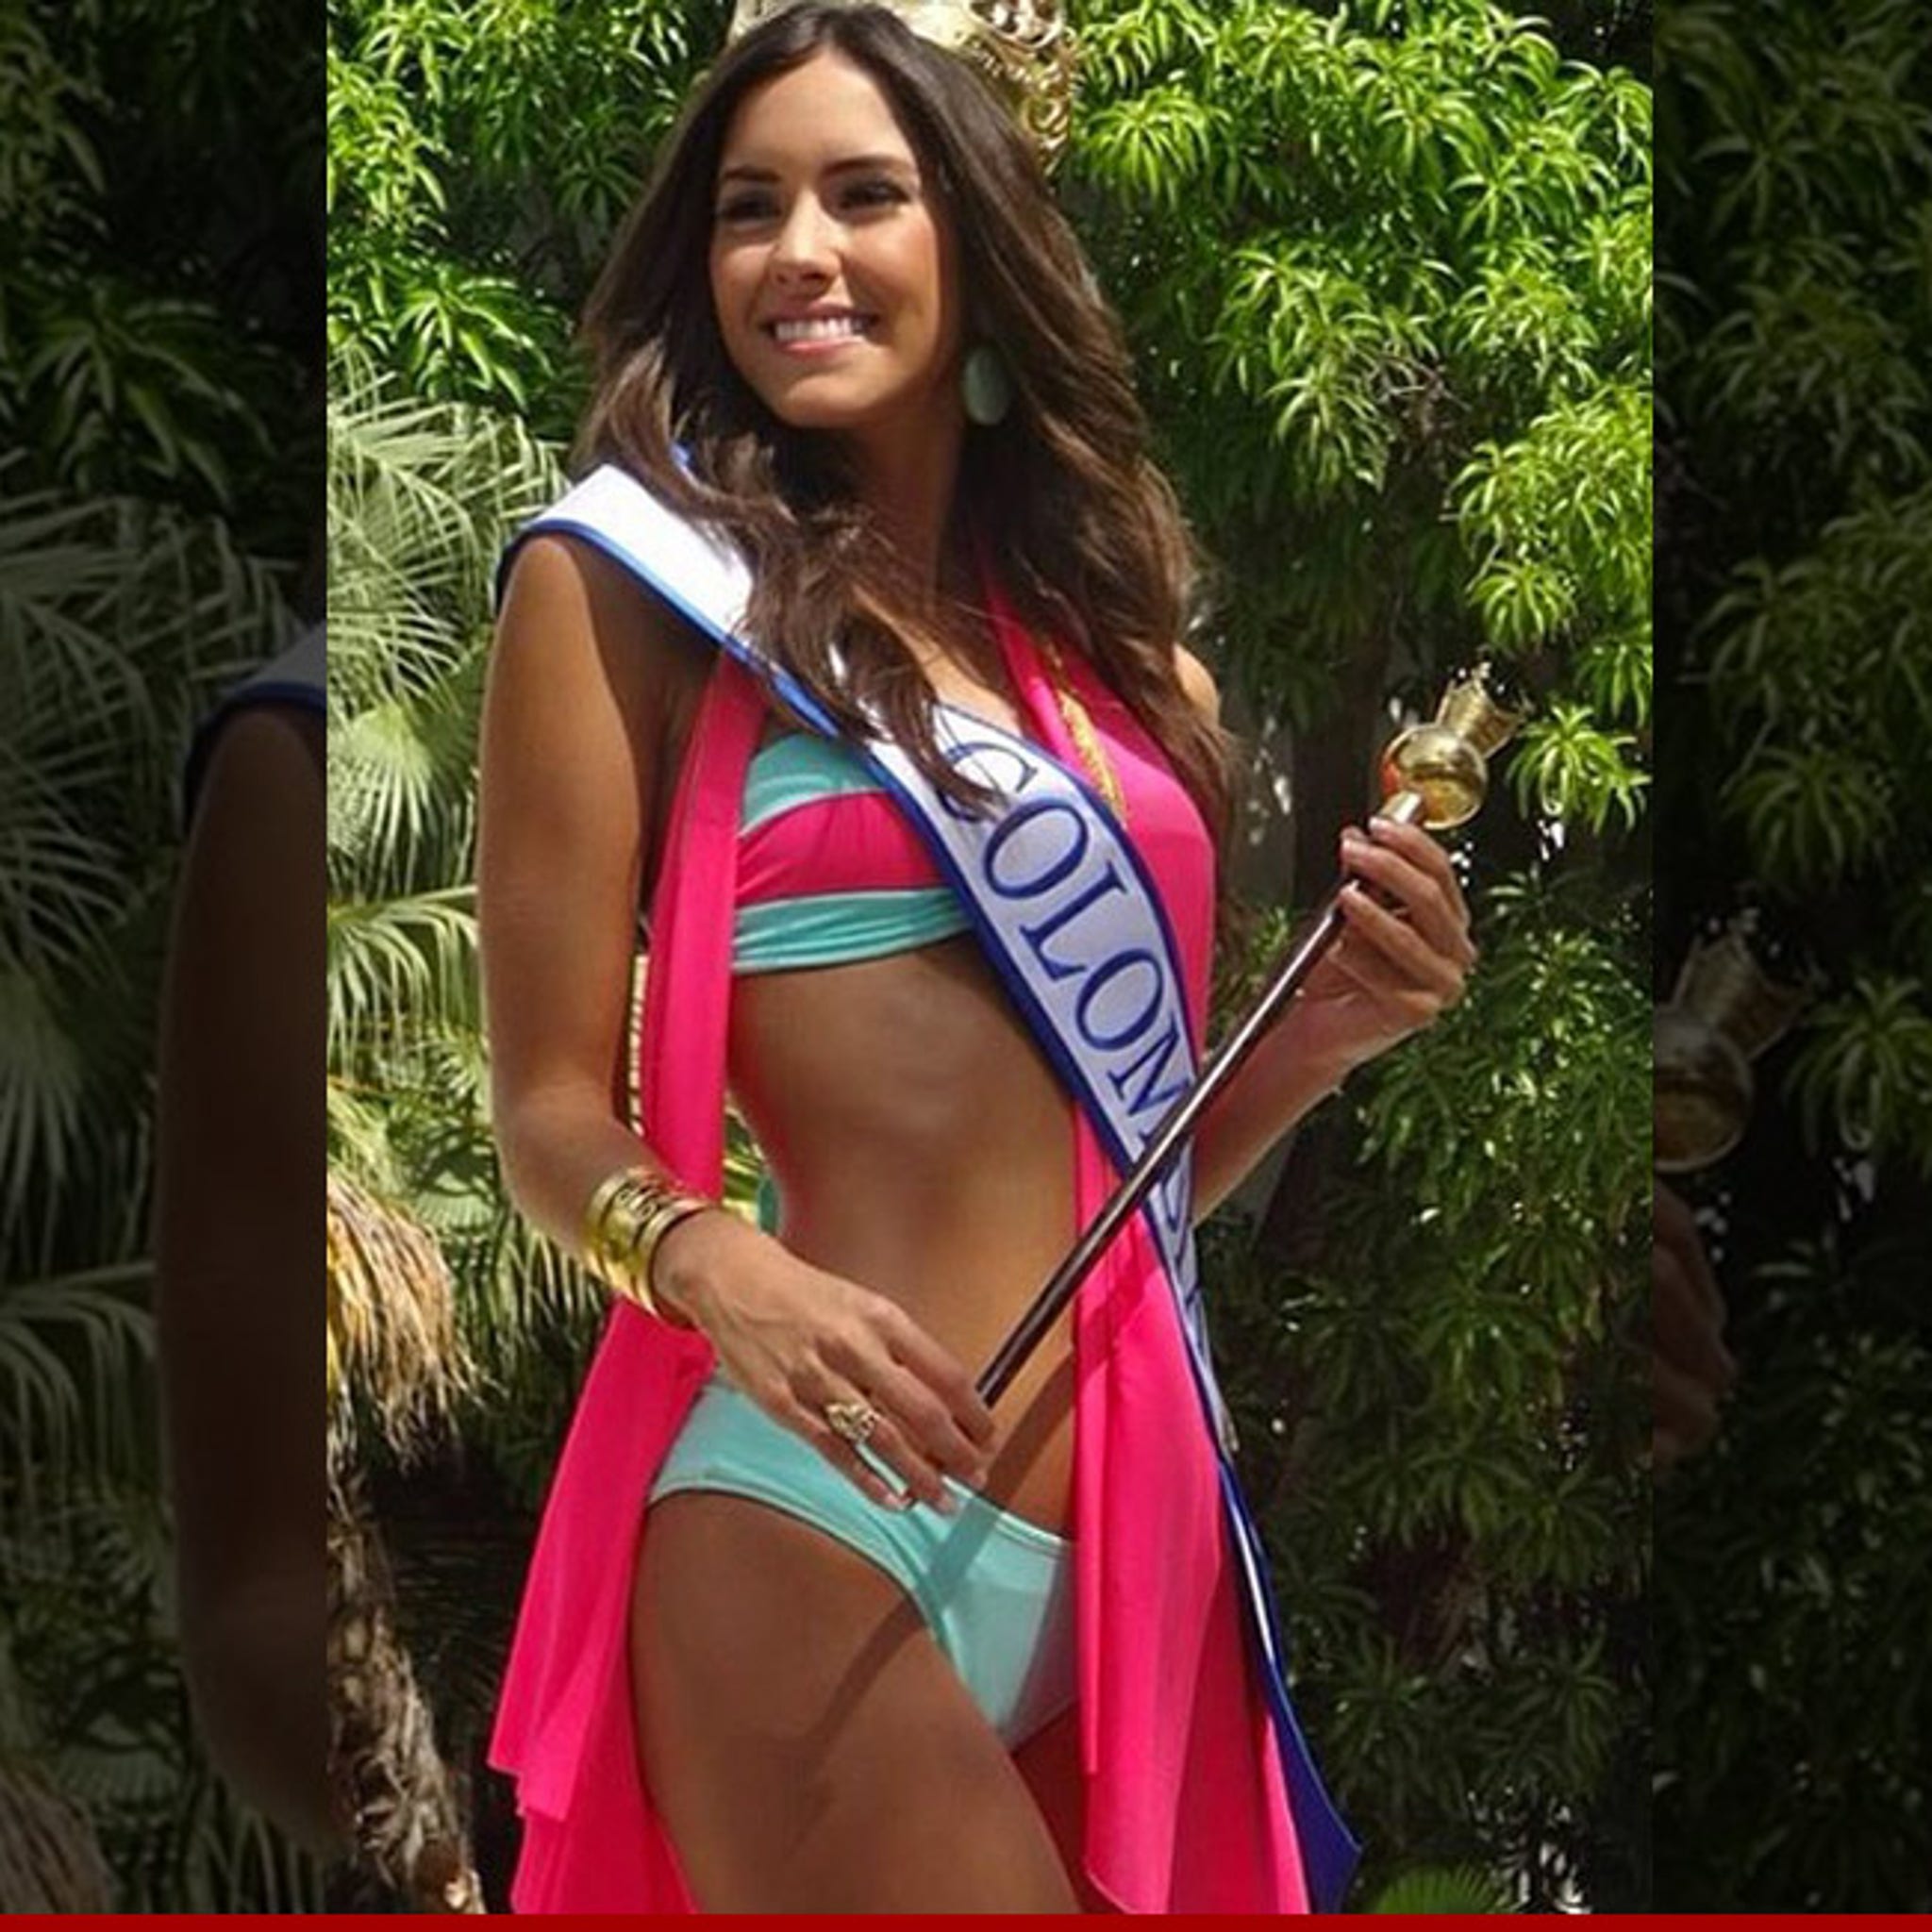 10 Eye-Popping Sexy Photos of Miss Universe Paulina Vega To Make Your  Monday Better